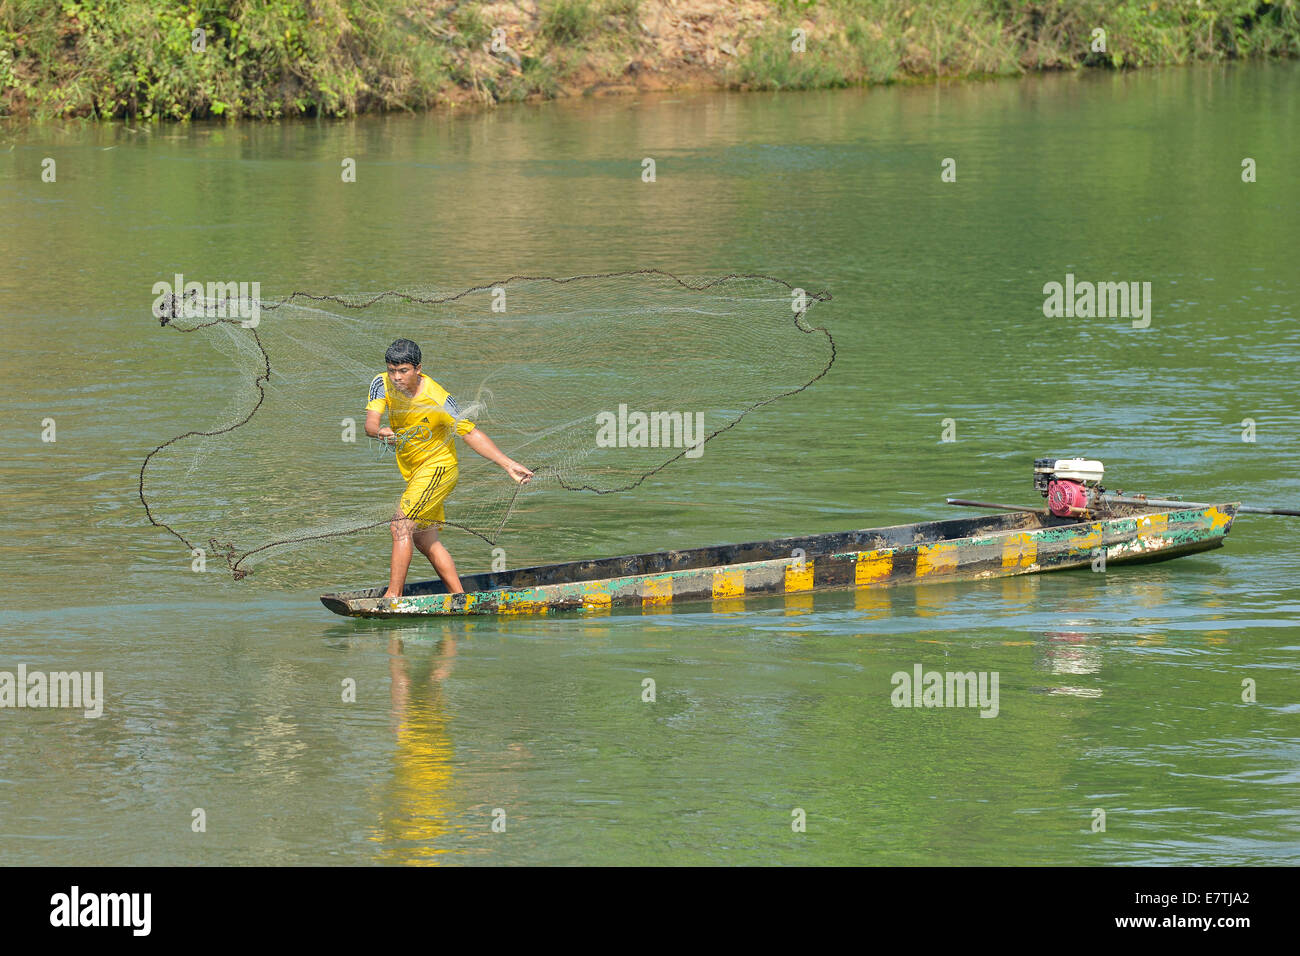 Don Det, Laos - March 13, 2014: Man fishing with a net in the Mekong river in Don Det, Laos. Stock Photo